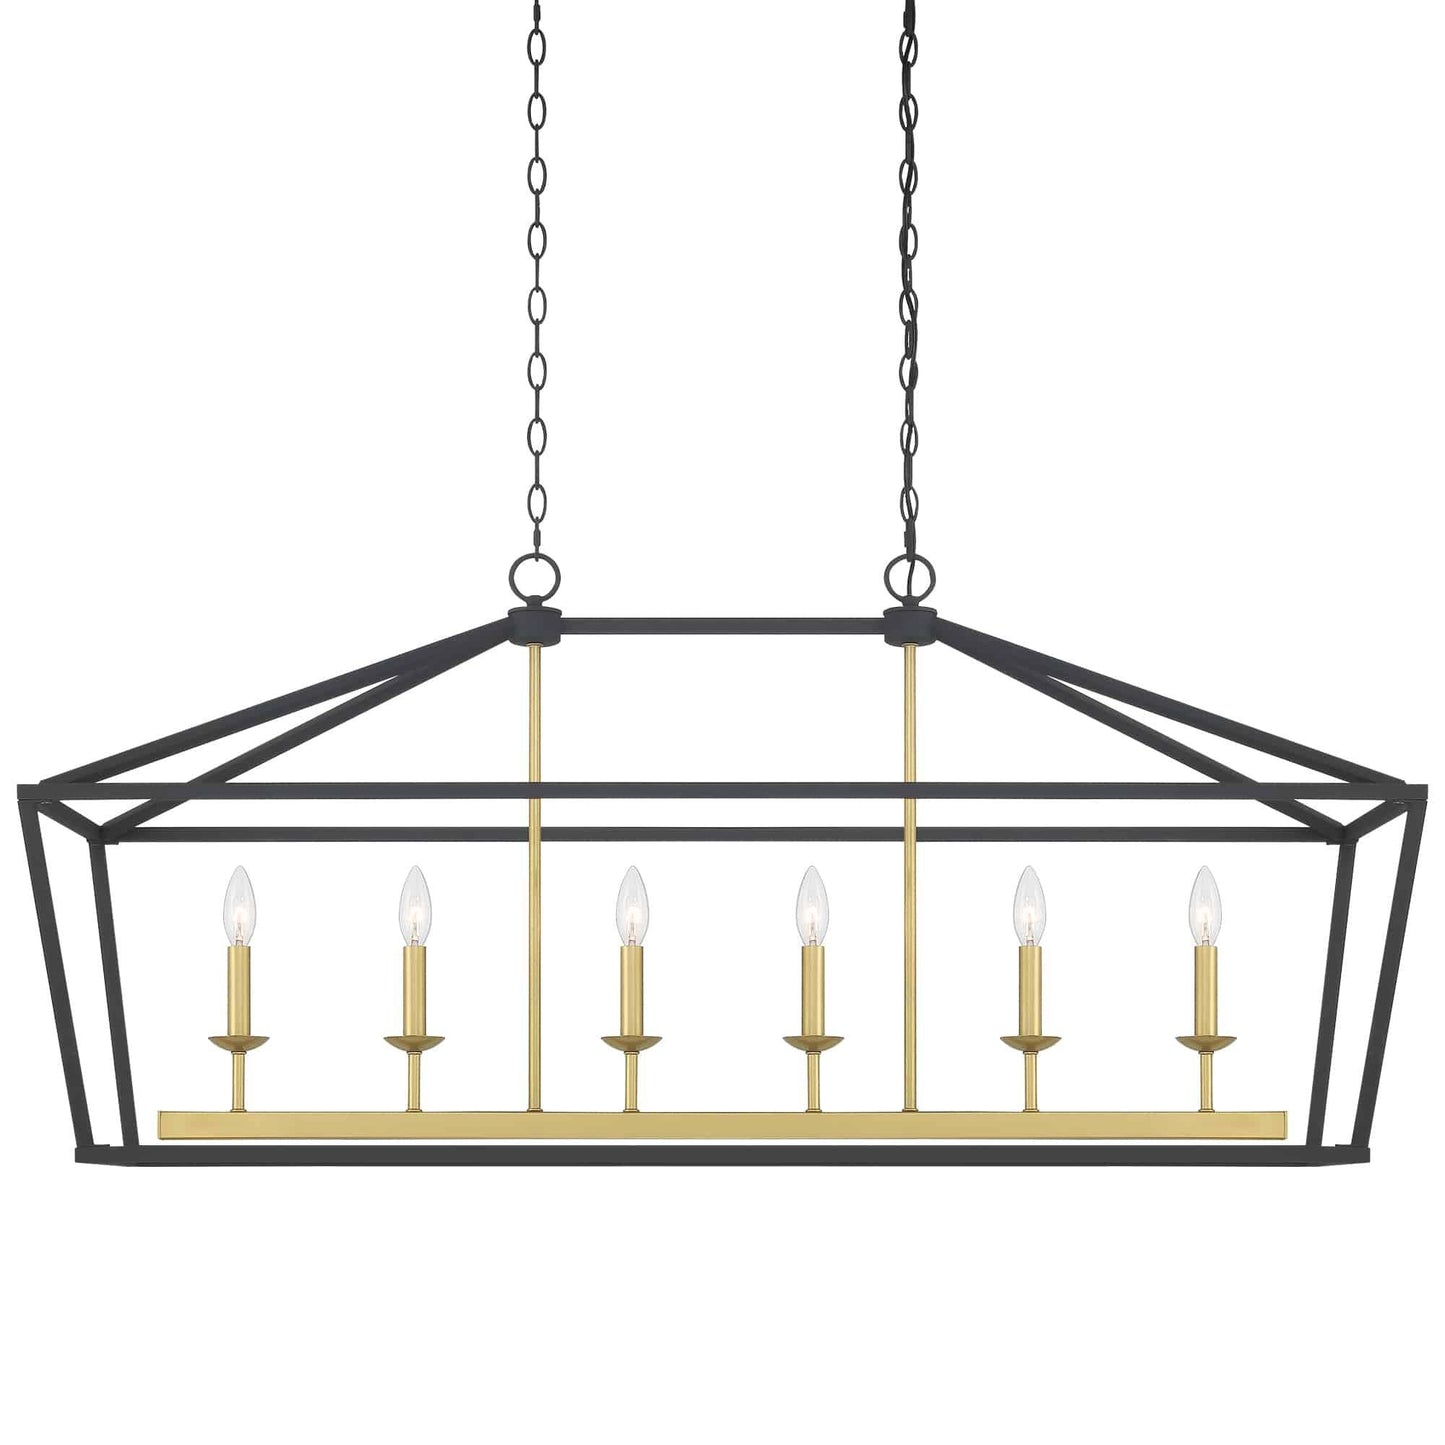 6 light linear kitchen island chandelier (2) by ACROMA